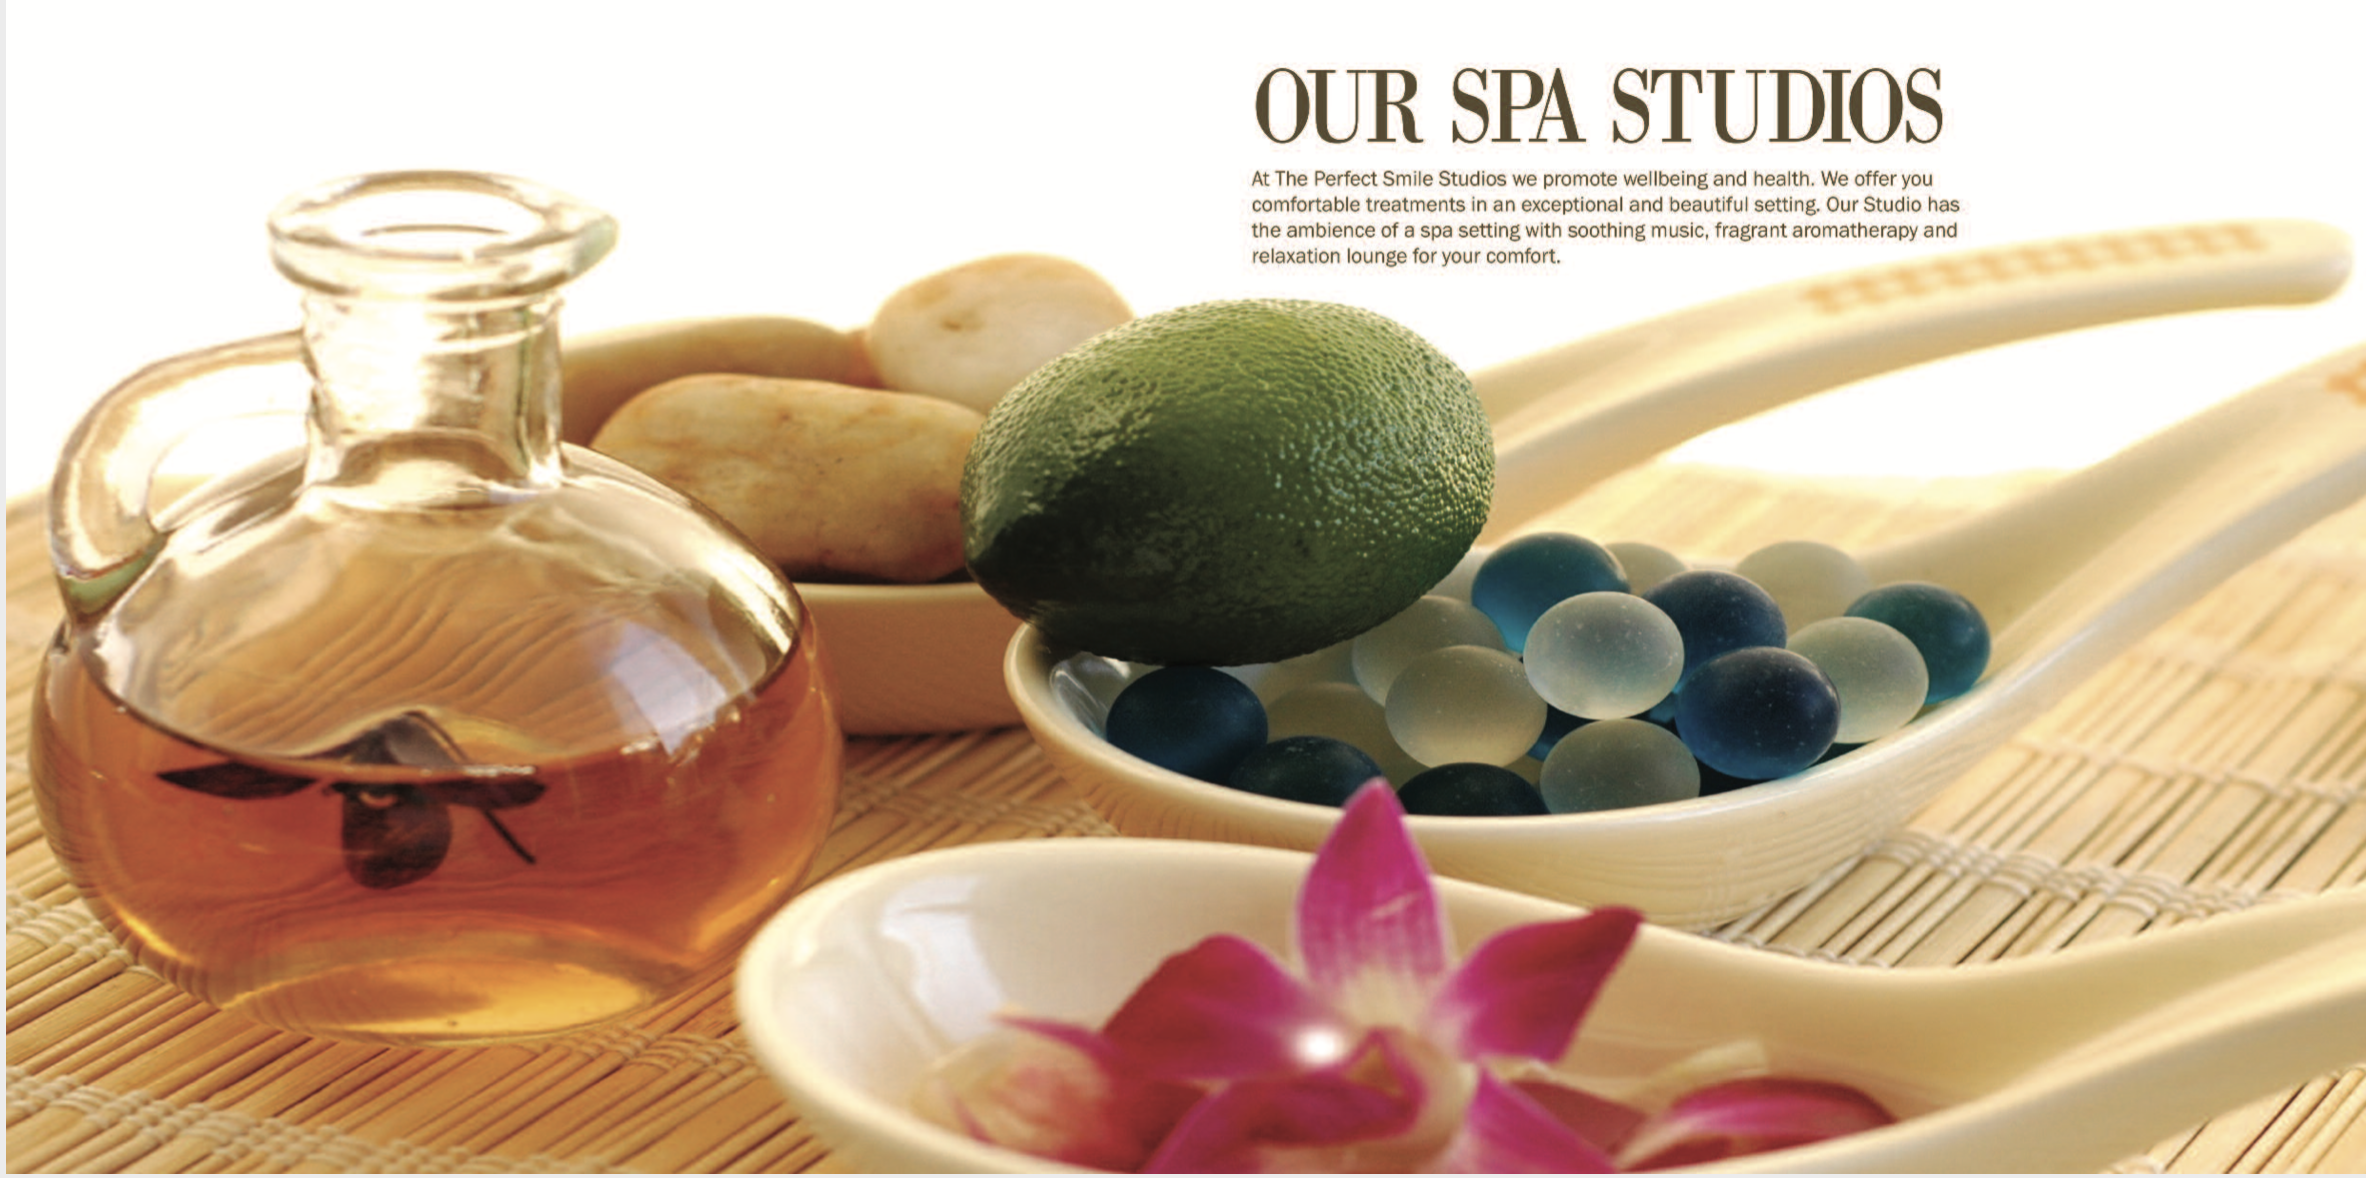 Example of "Our Spa Studios" advertisement